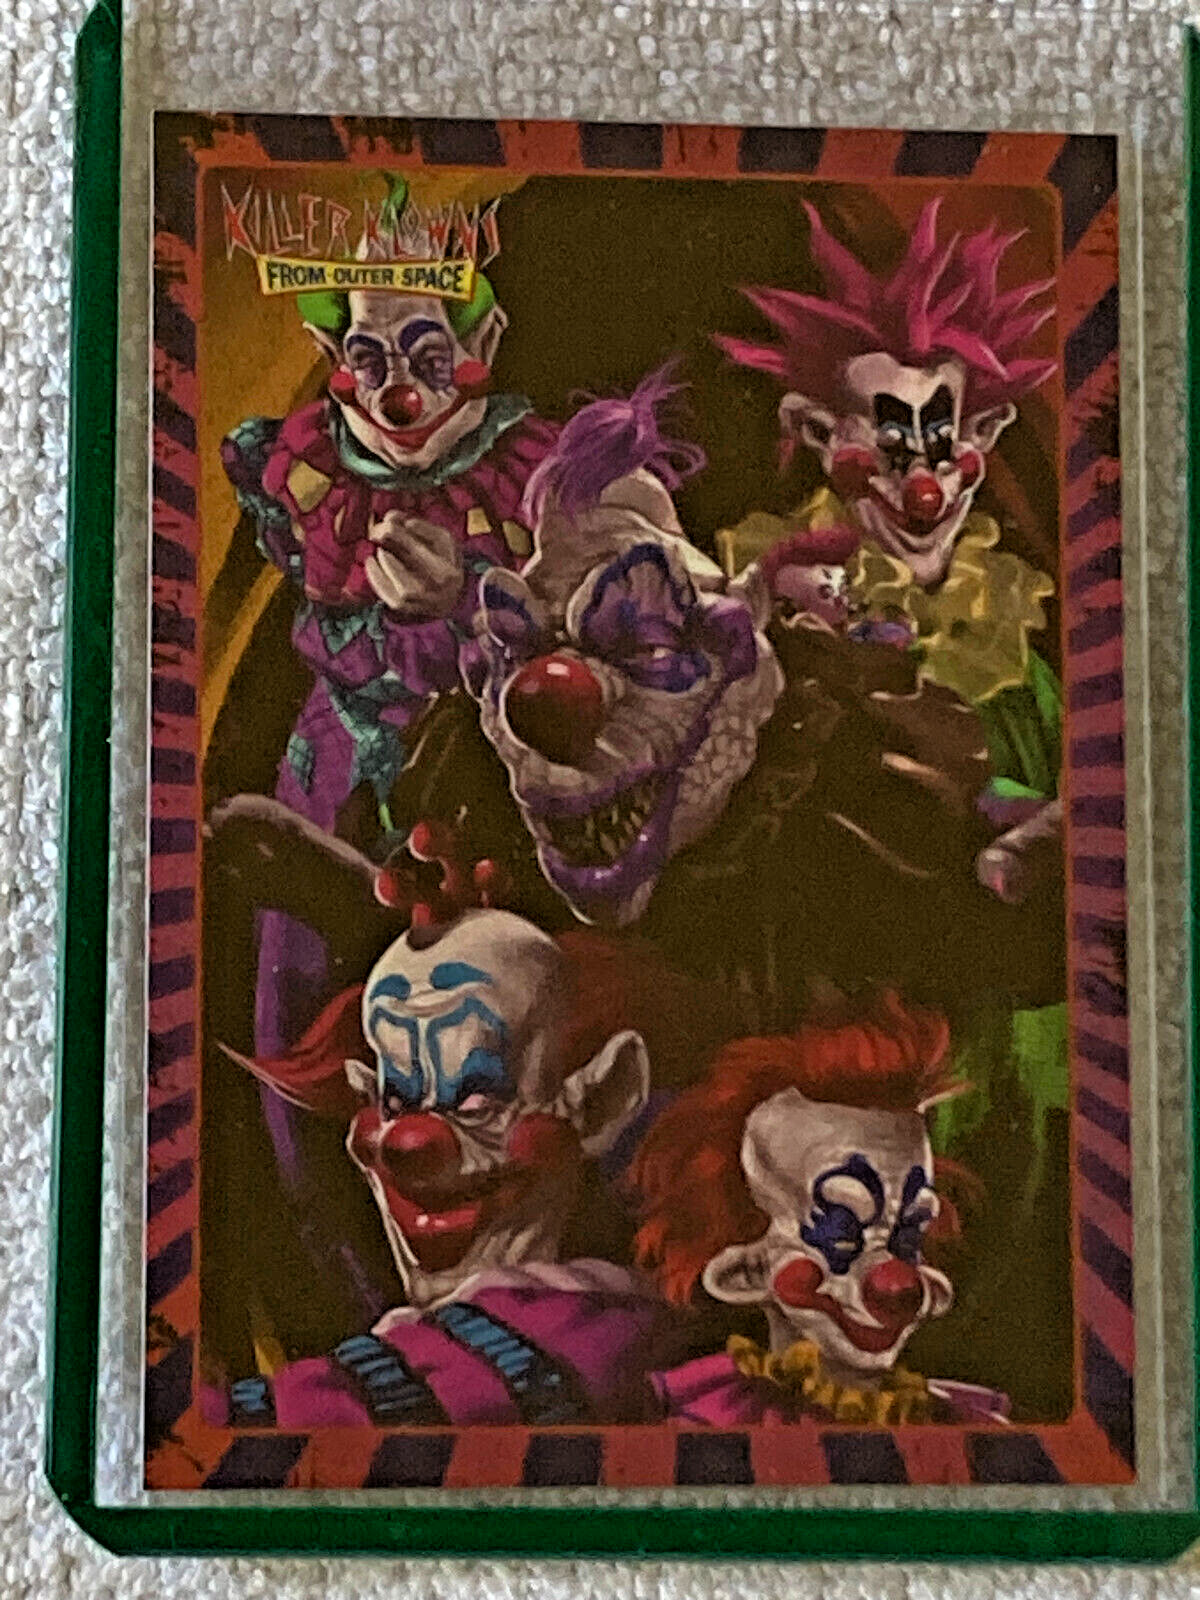 2023 Cardsmiths Killer Klowns from Outer Space BP-3 Trading Card NM Promo Foil